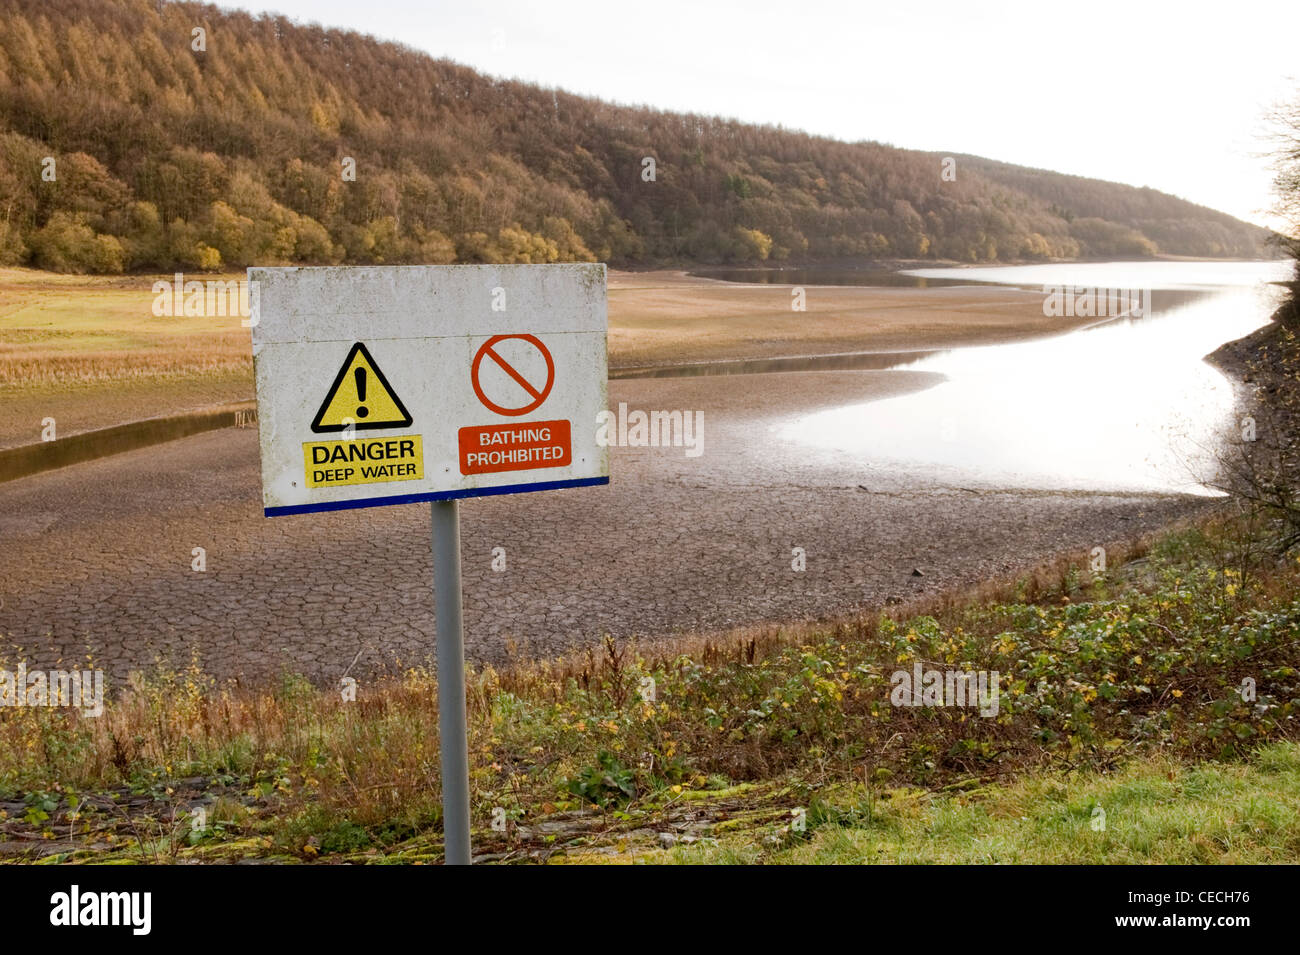 Low water level after dry summer drought & danger warning signs (deep water bathing) - ironic - Lindley Wood Reservoir, North Yorkshire, England, UK. Stock Photo